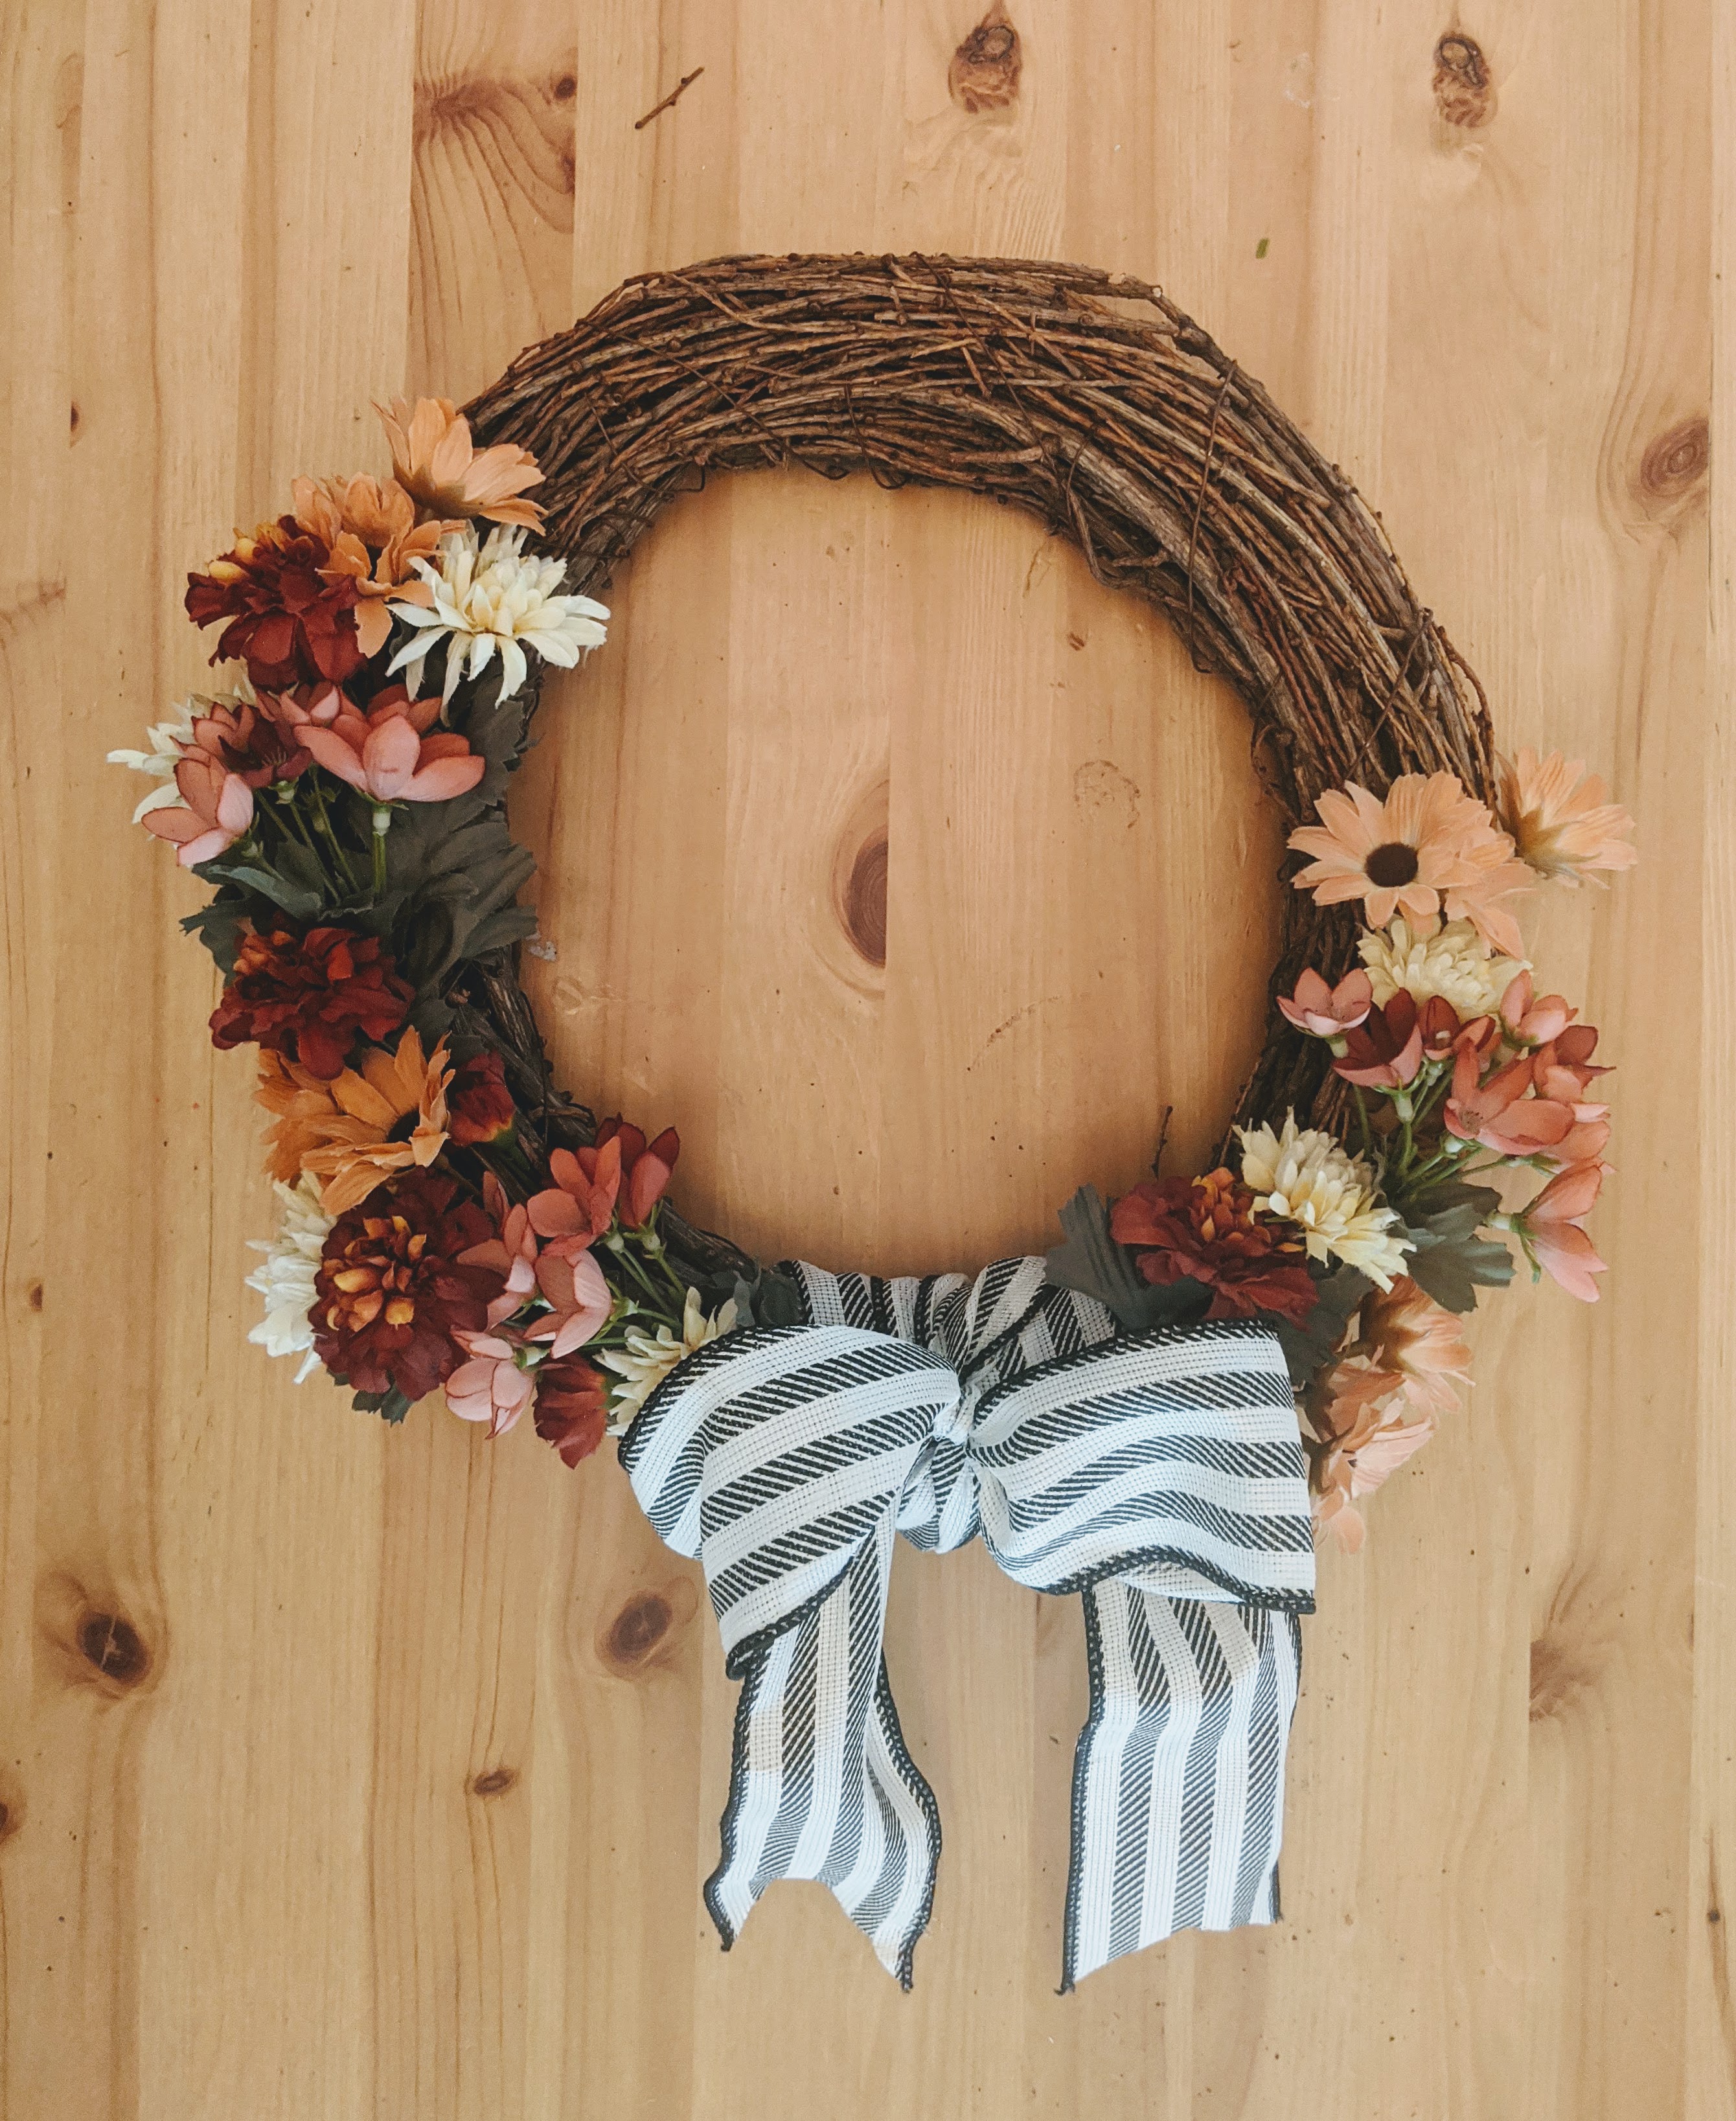 fall wreath made of twigs and vintage flowers with striped bow